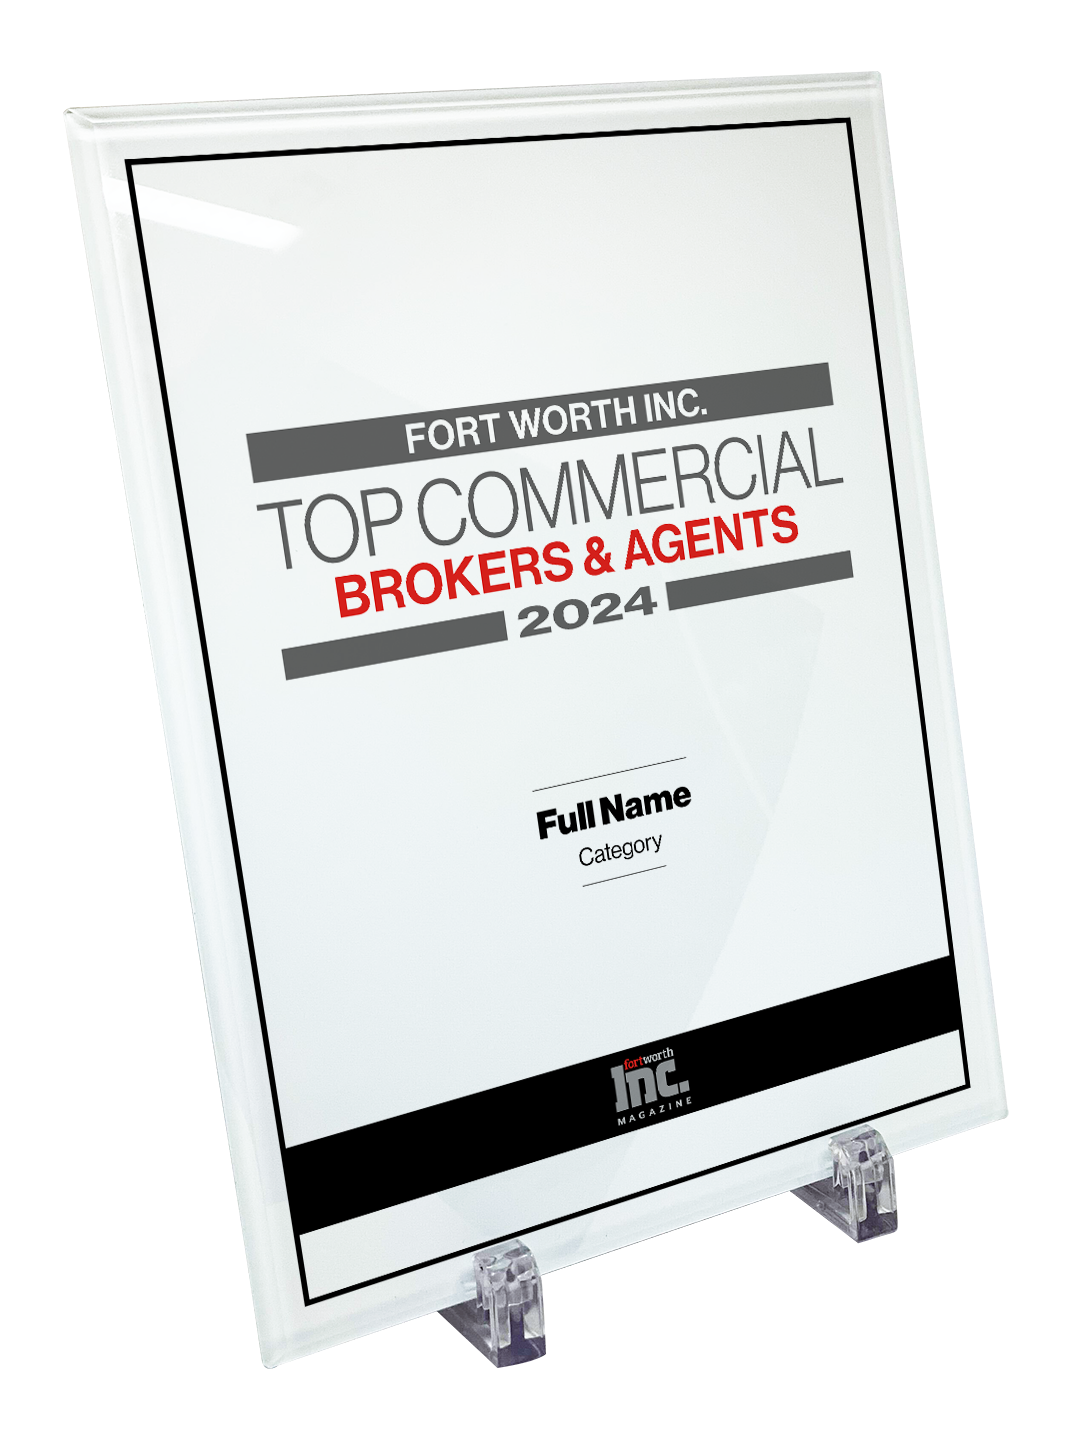 Fort Worth Inc. Top Commercial Brokers & Agents Award Crystal Plaque